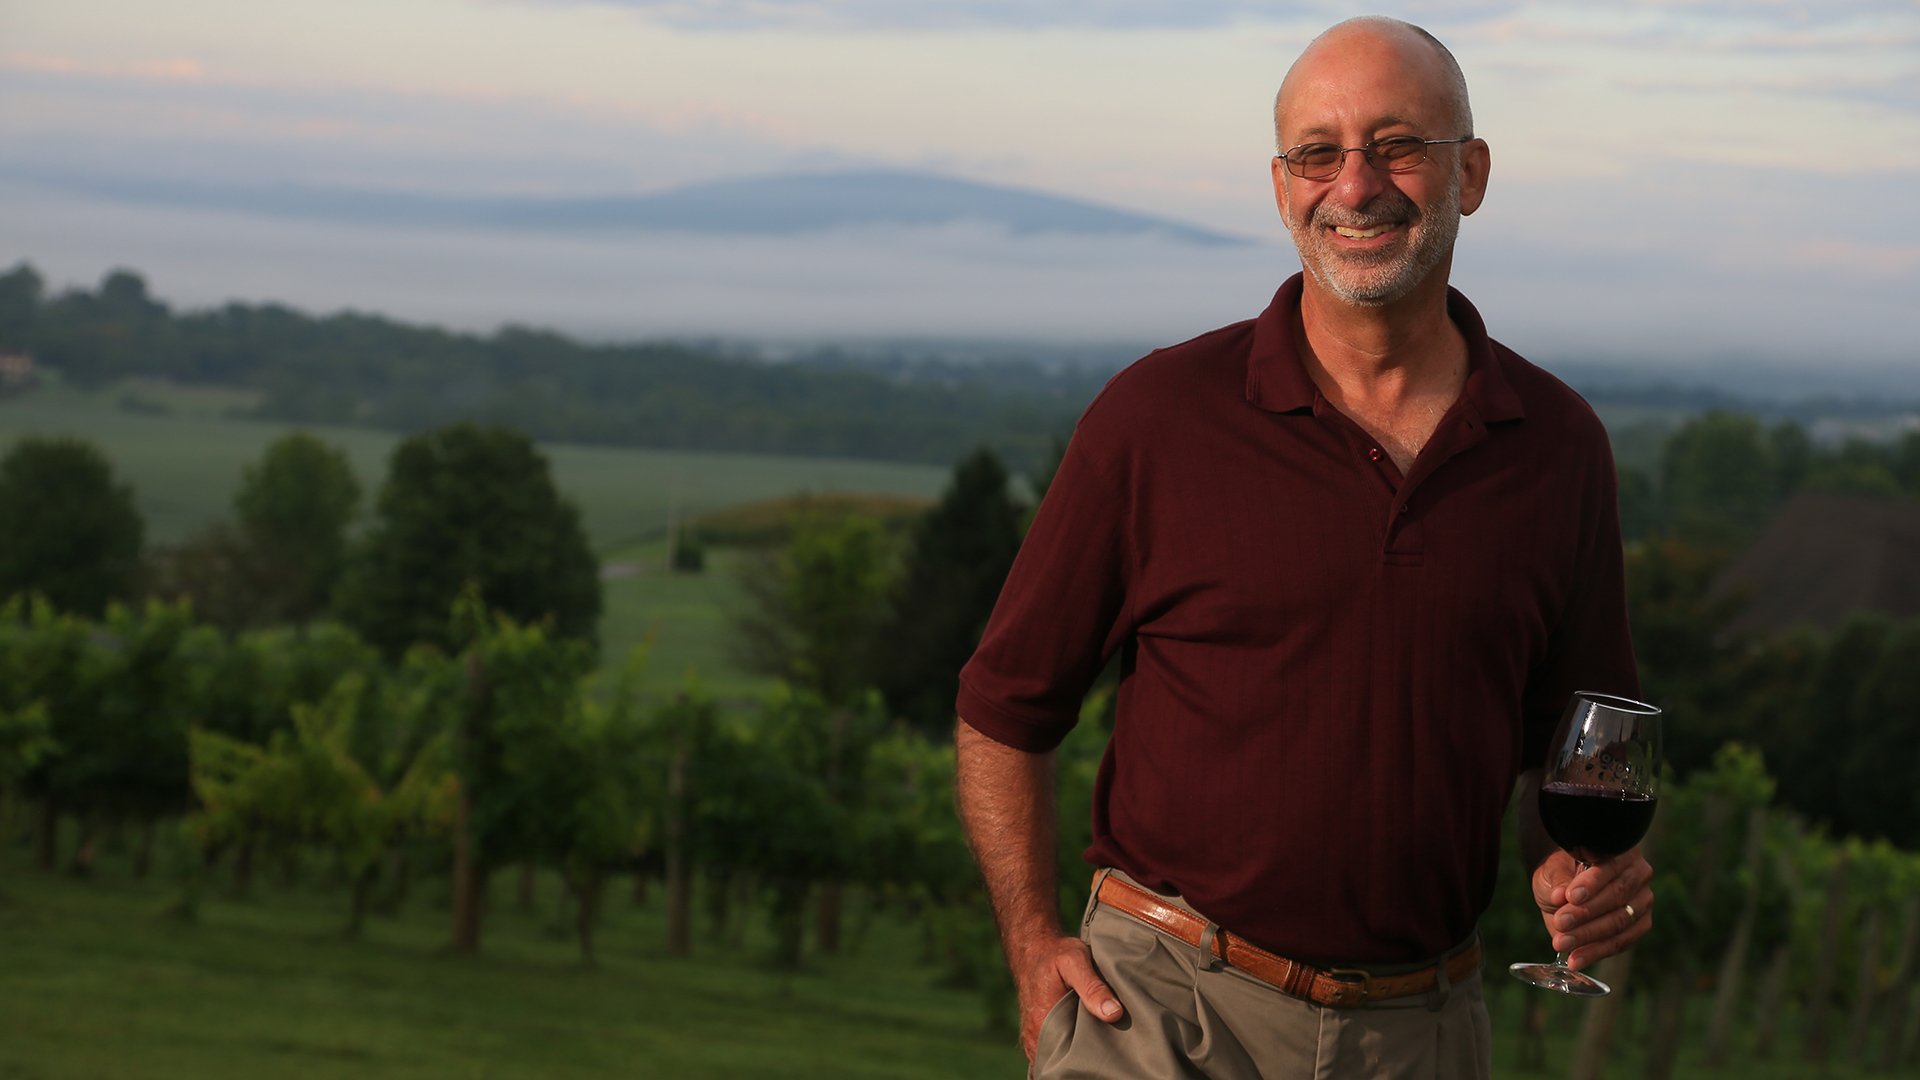 Winery owner Garry Cohen standing on the wineyard 